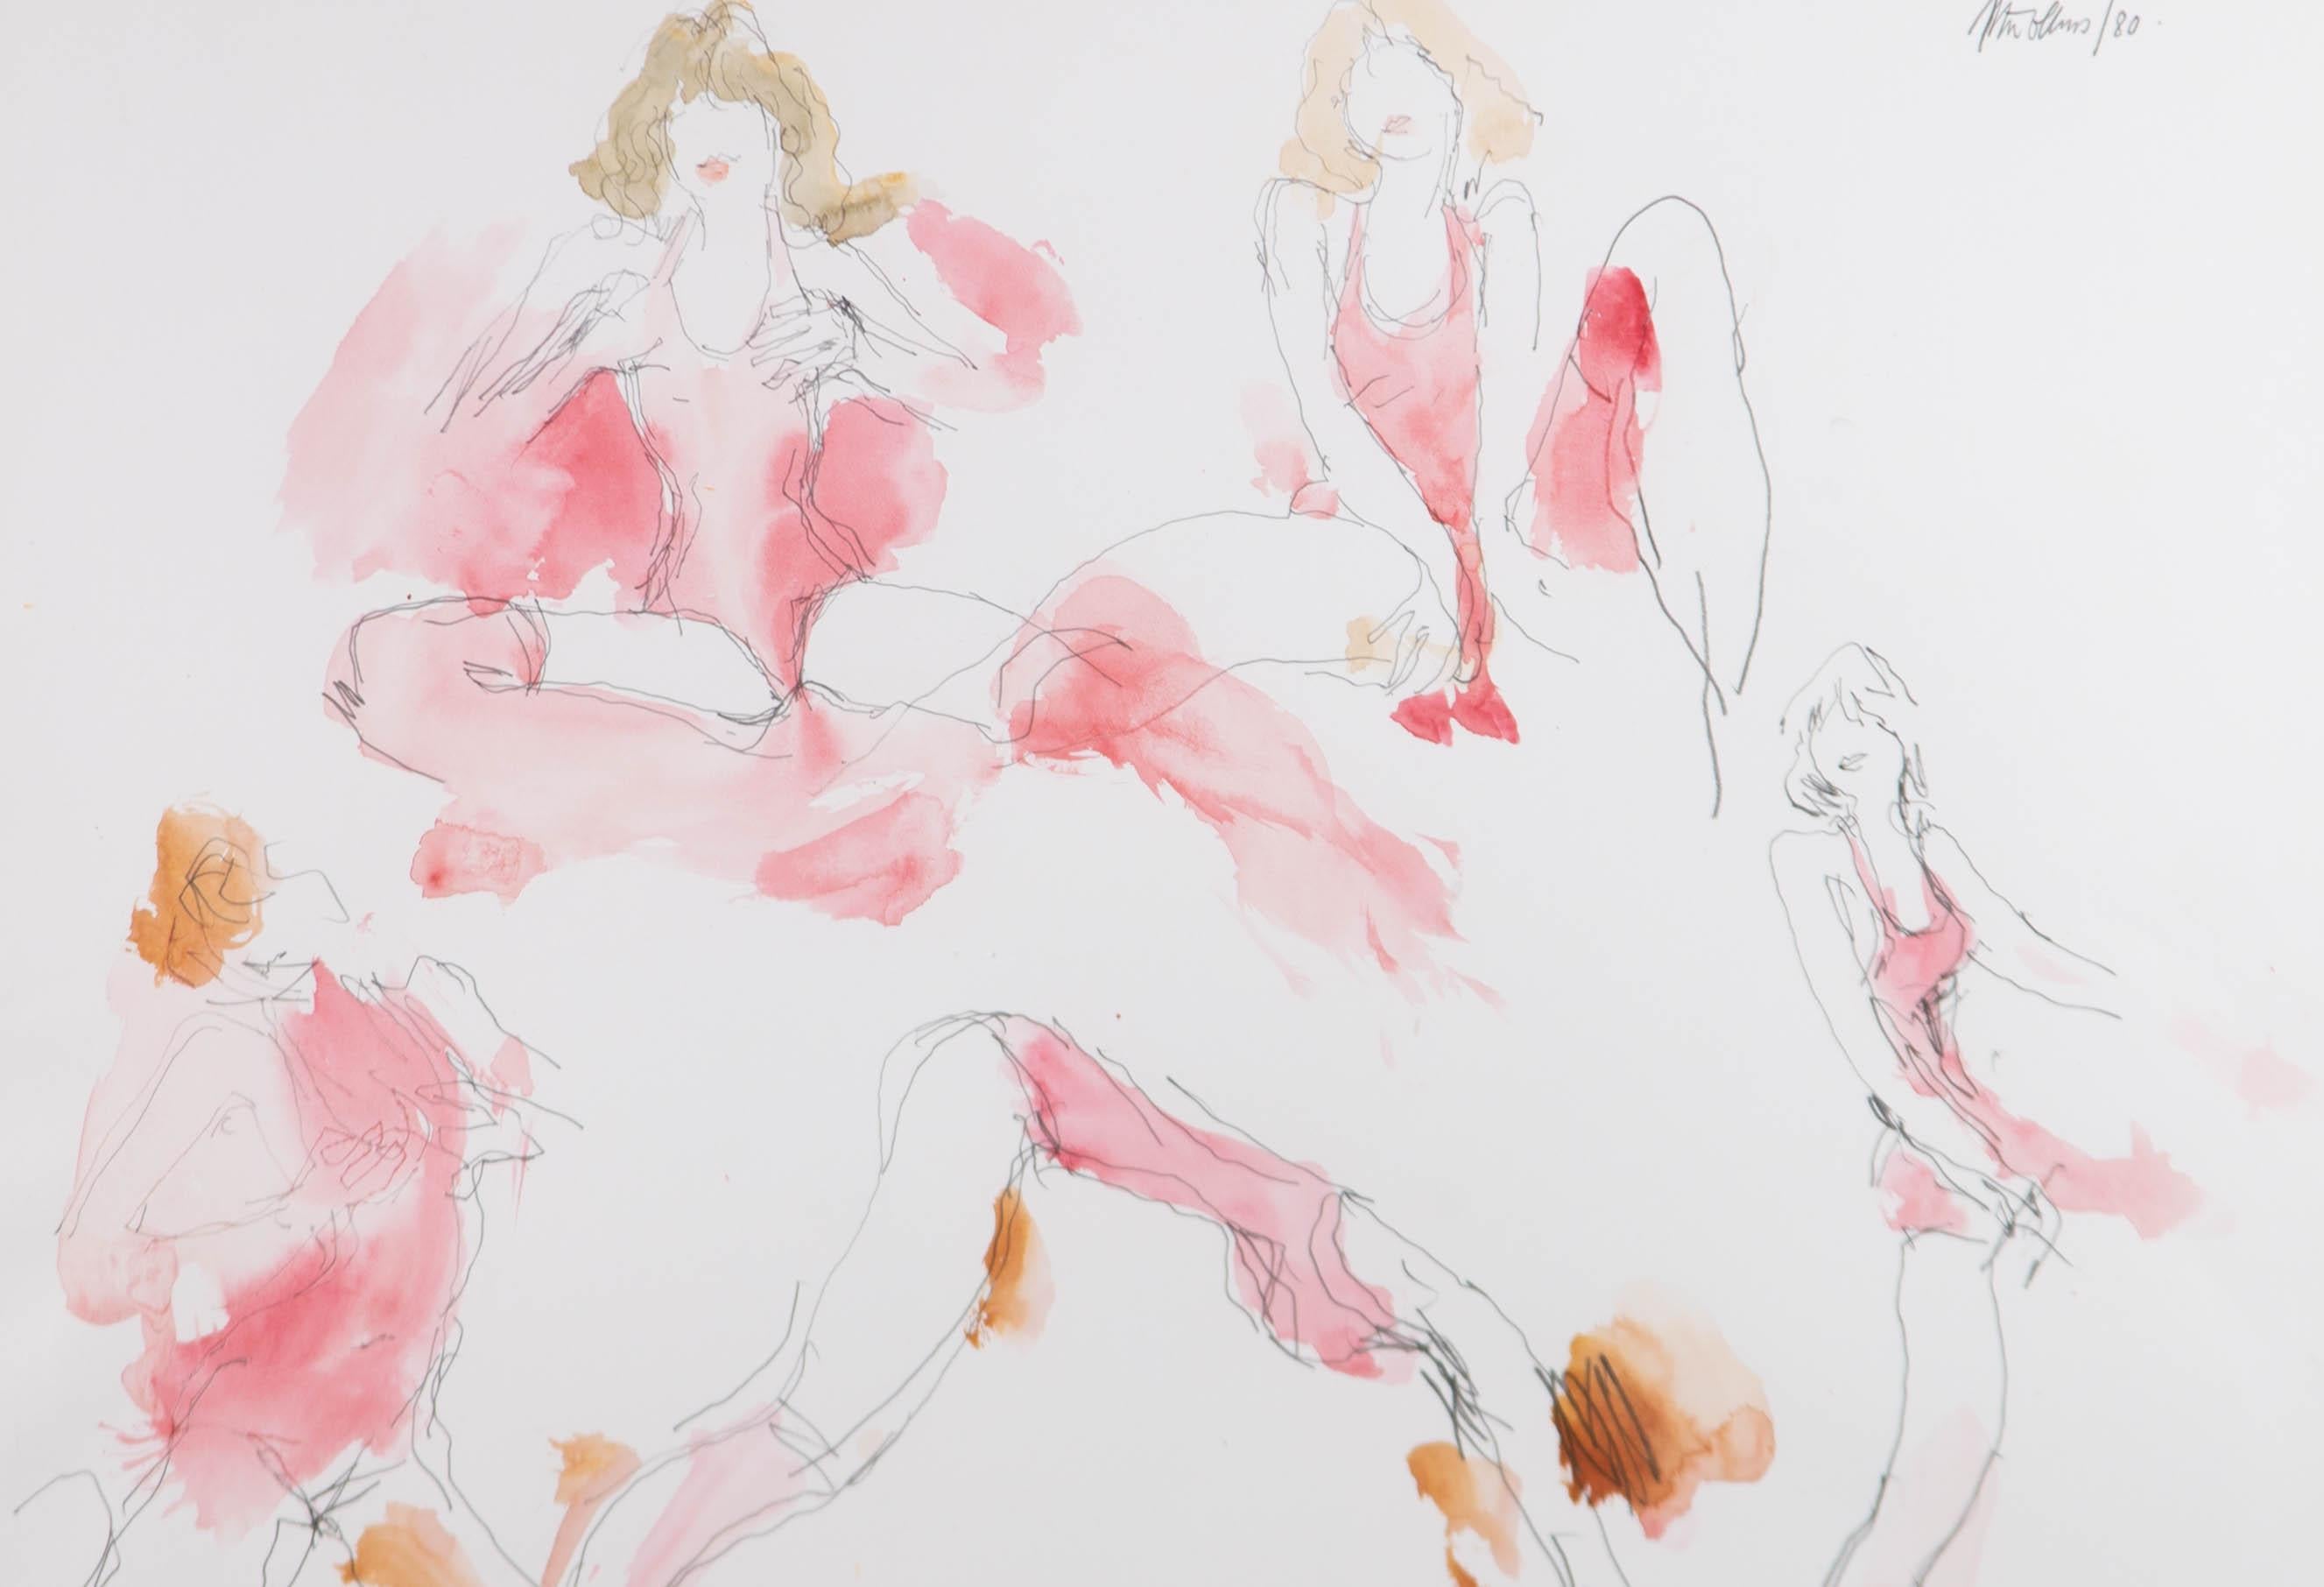 A captivating watercolour and graphite drawing by the artist Peter Collins. The scene depicts several studies of the same figure in a pink leotard. Signed and dated to the upper right-hand corner. Well-presented in a white on red double card mount